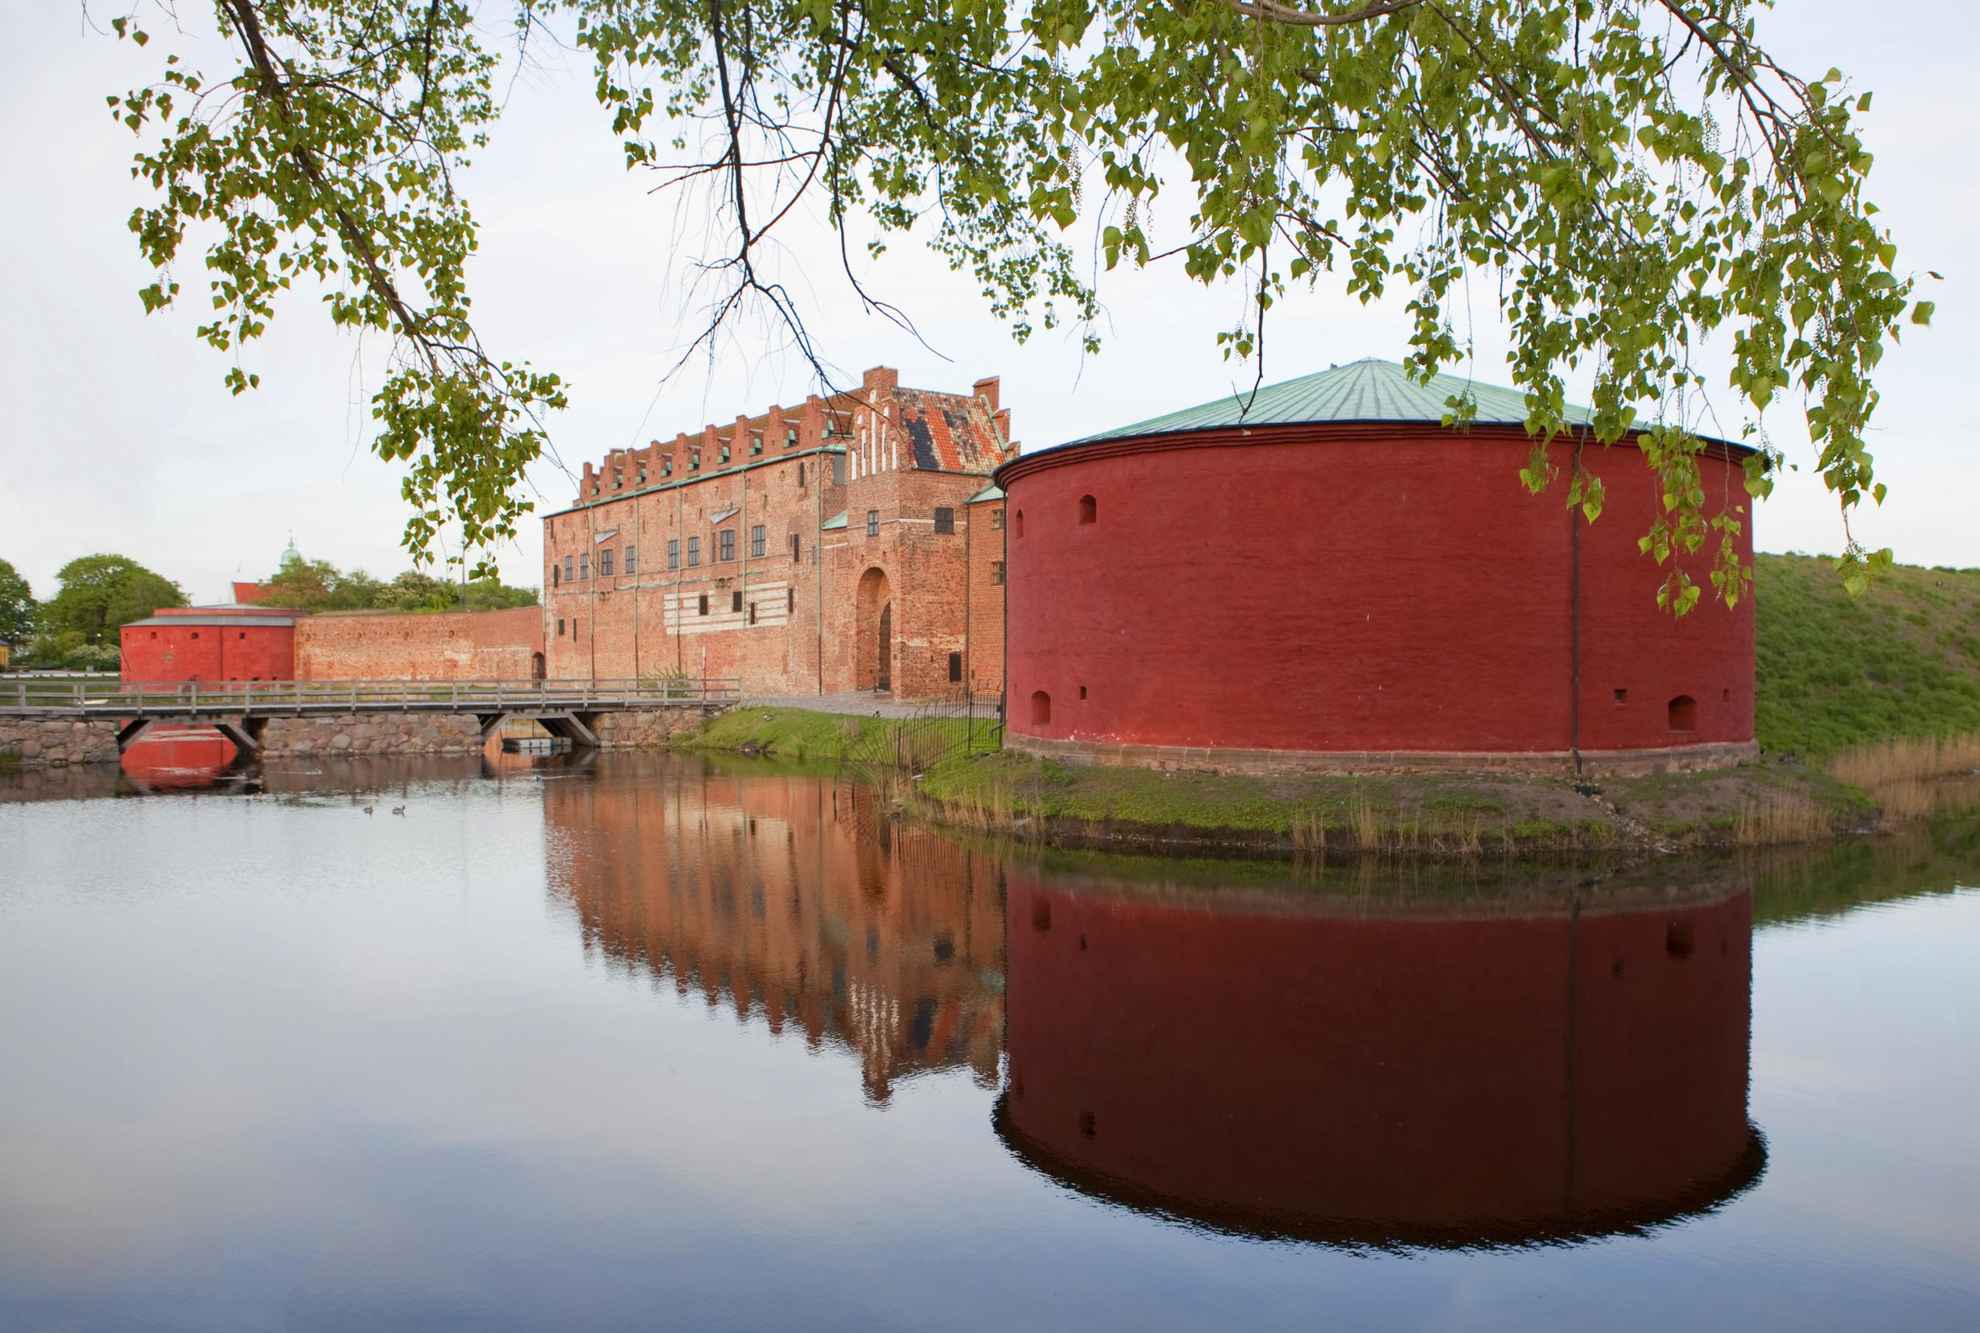 Malmöhus Castle is a large round tower next to a brick building, surrounded by water. Another round tower on the opposite side in the background. Green leaves in the foreground.